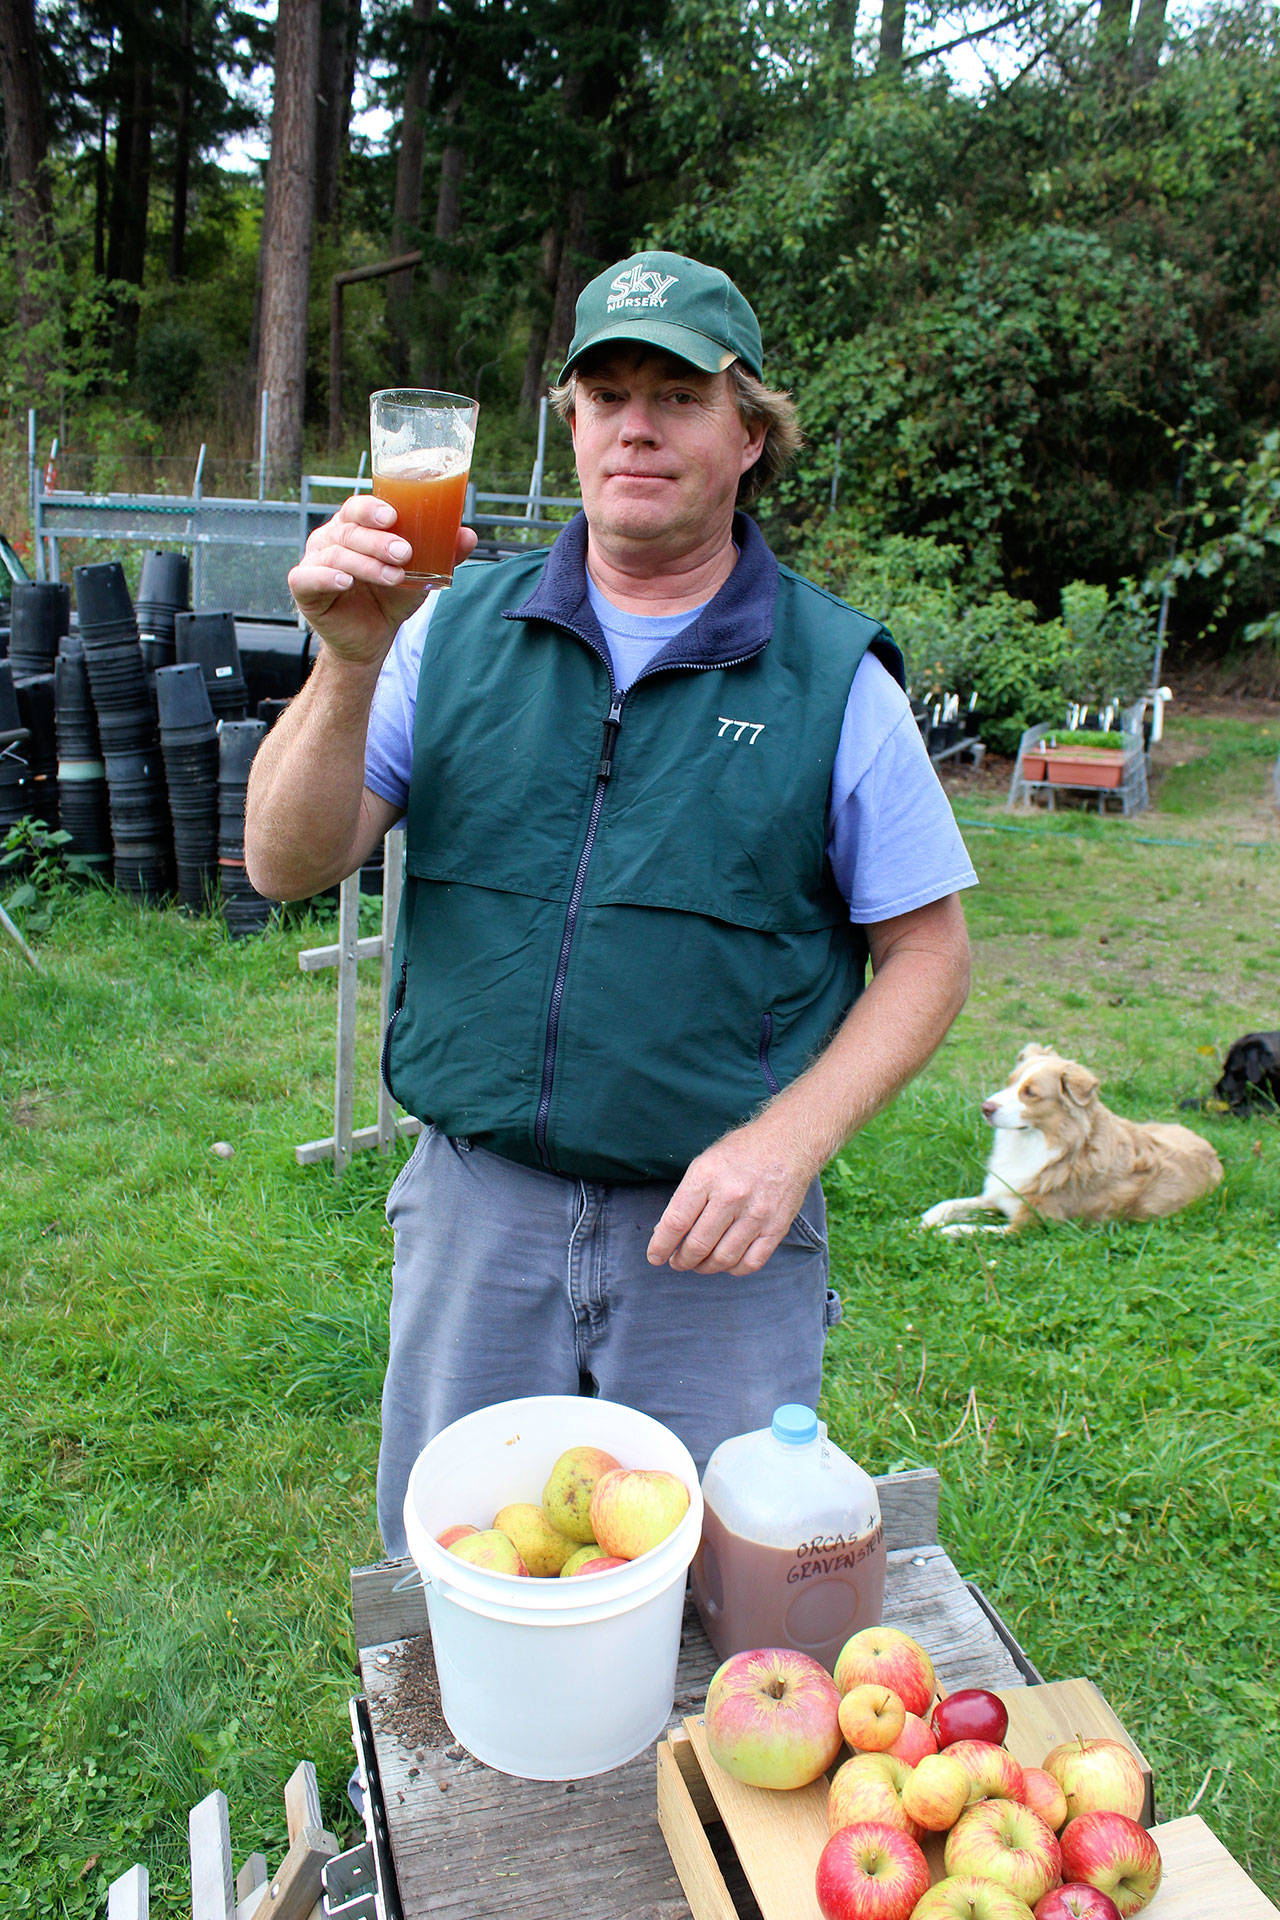 Dan Vorhis tries out his just-squeezed juice at Muscle and Arm Farm in Freeland as his canine workers take a rest.